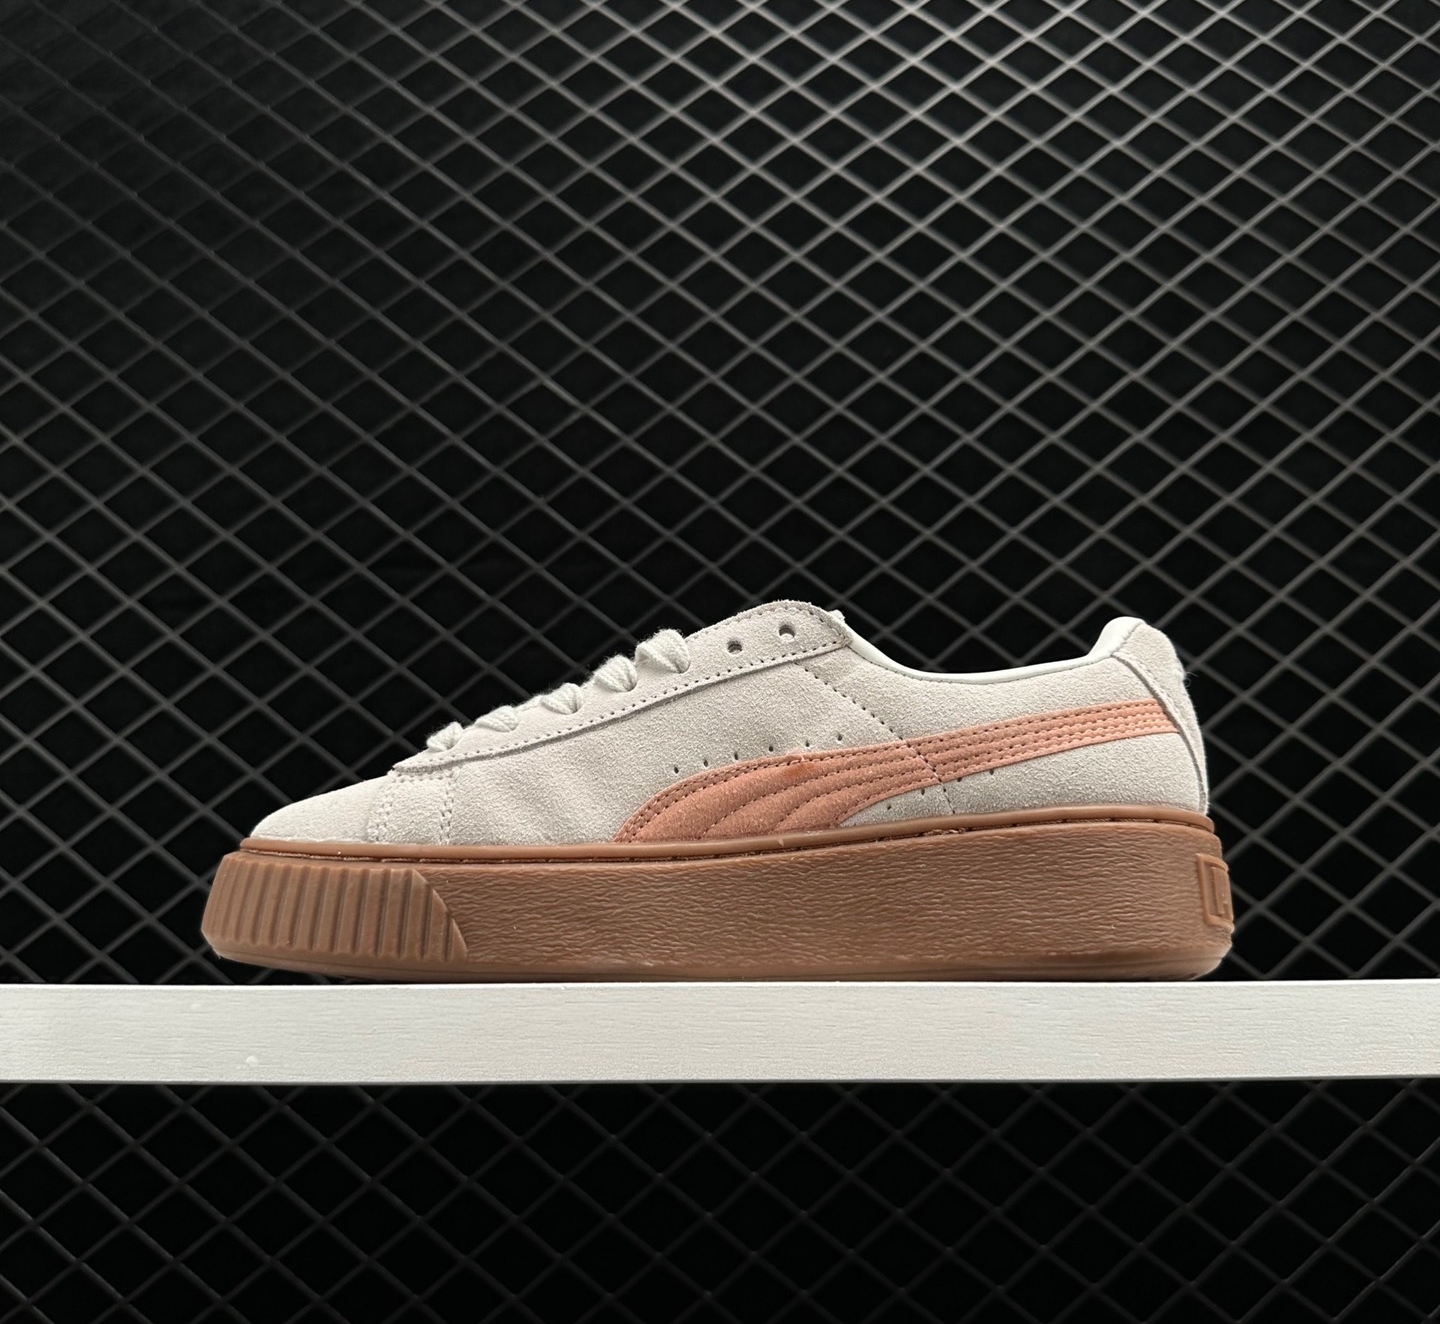 Puma Suede Platform Casual Shoes: Stylish and Comfortable Footwear